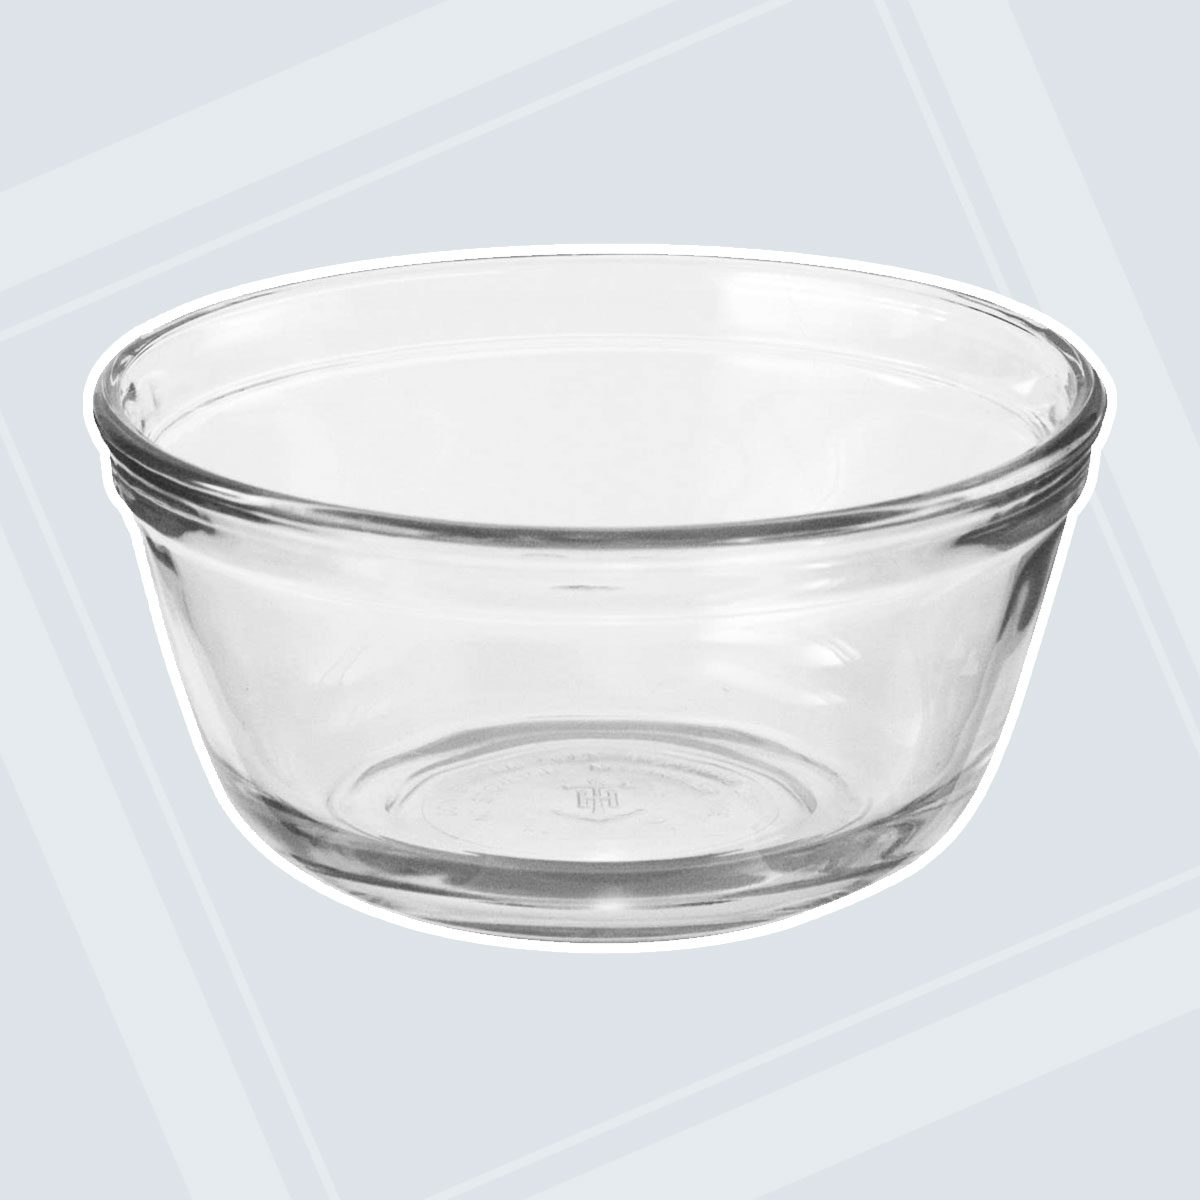  Anchor Hocking Batter Bowl, 2 Quart Glass Mixing Bowl with Red  Lid: Mixing Bowls: Home & Kitchen